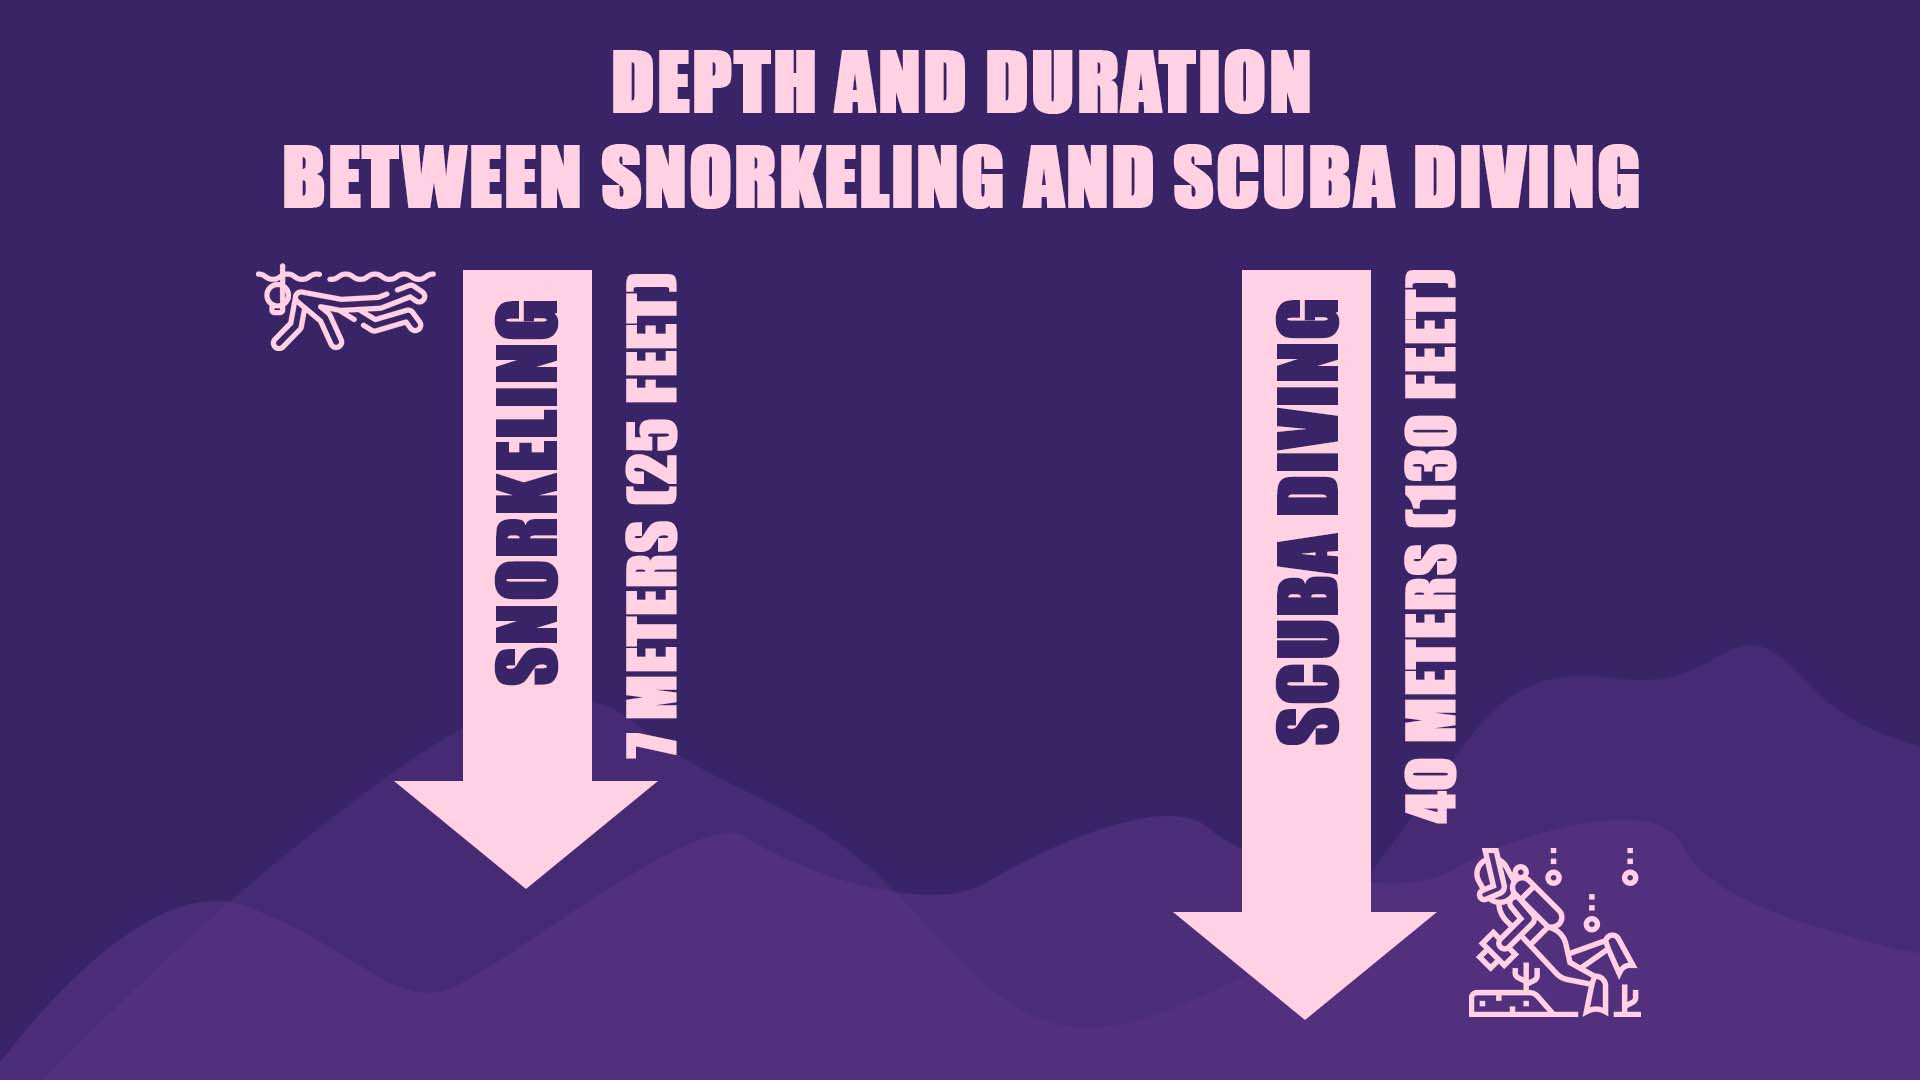 Depth and duration between snorkeling and scuba diving